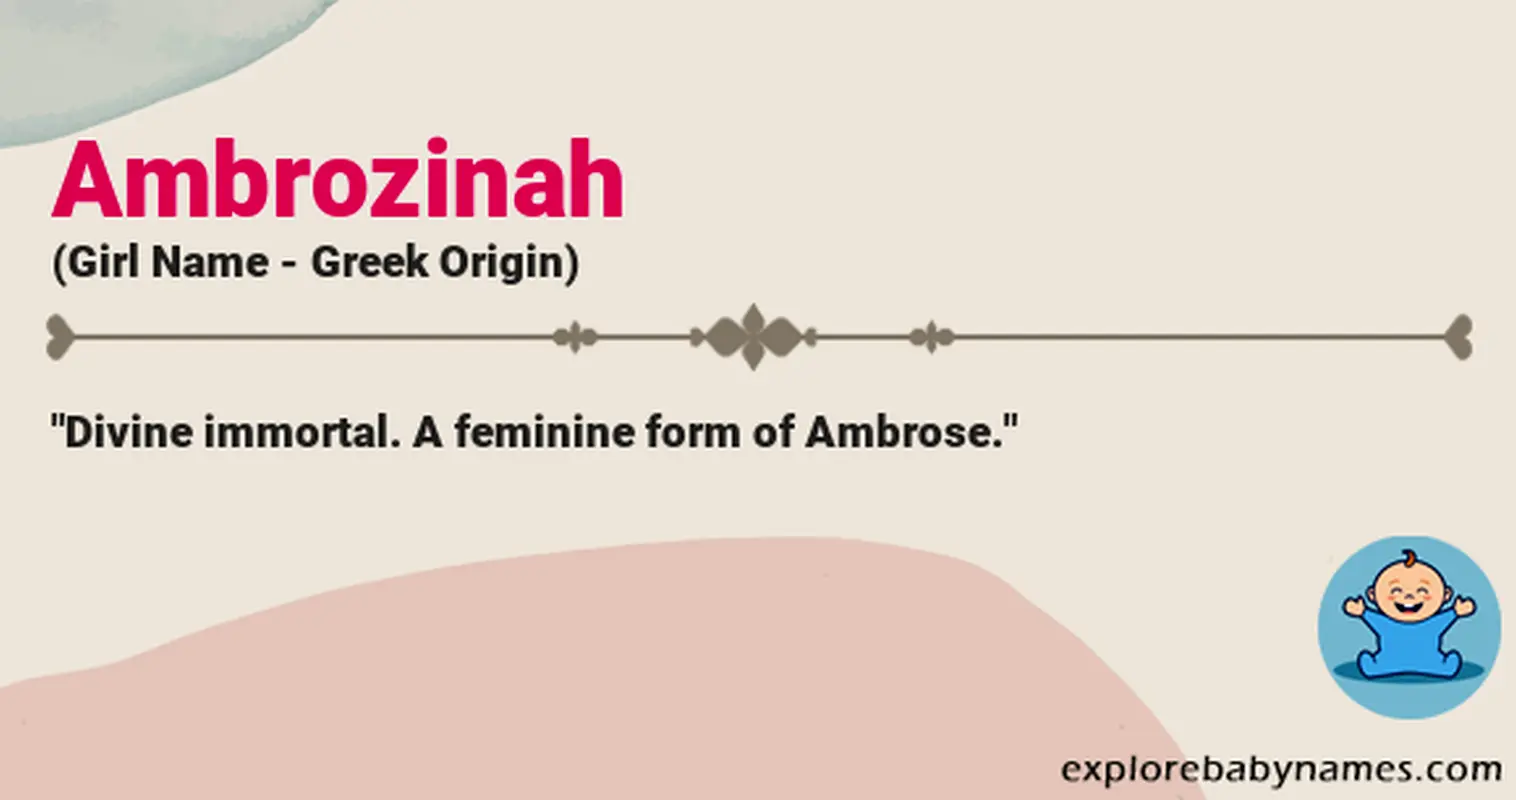 Meaning of Ambrozinah